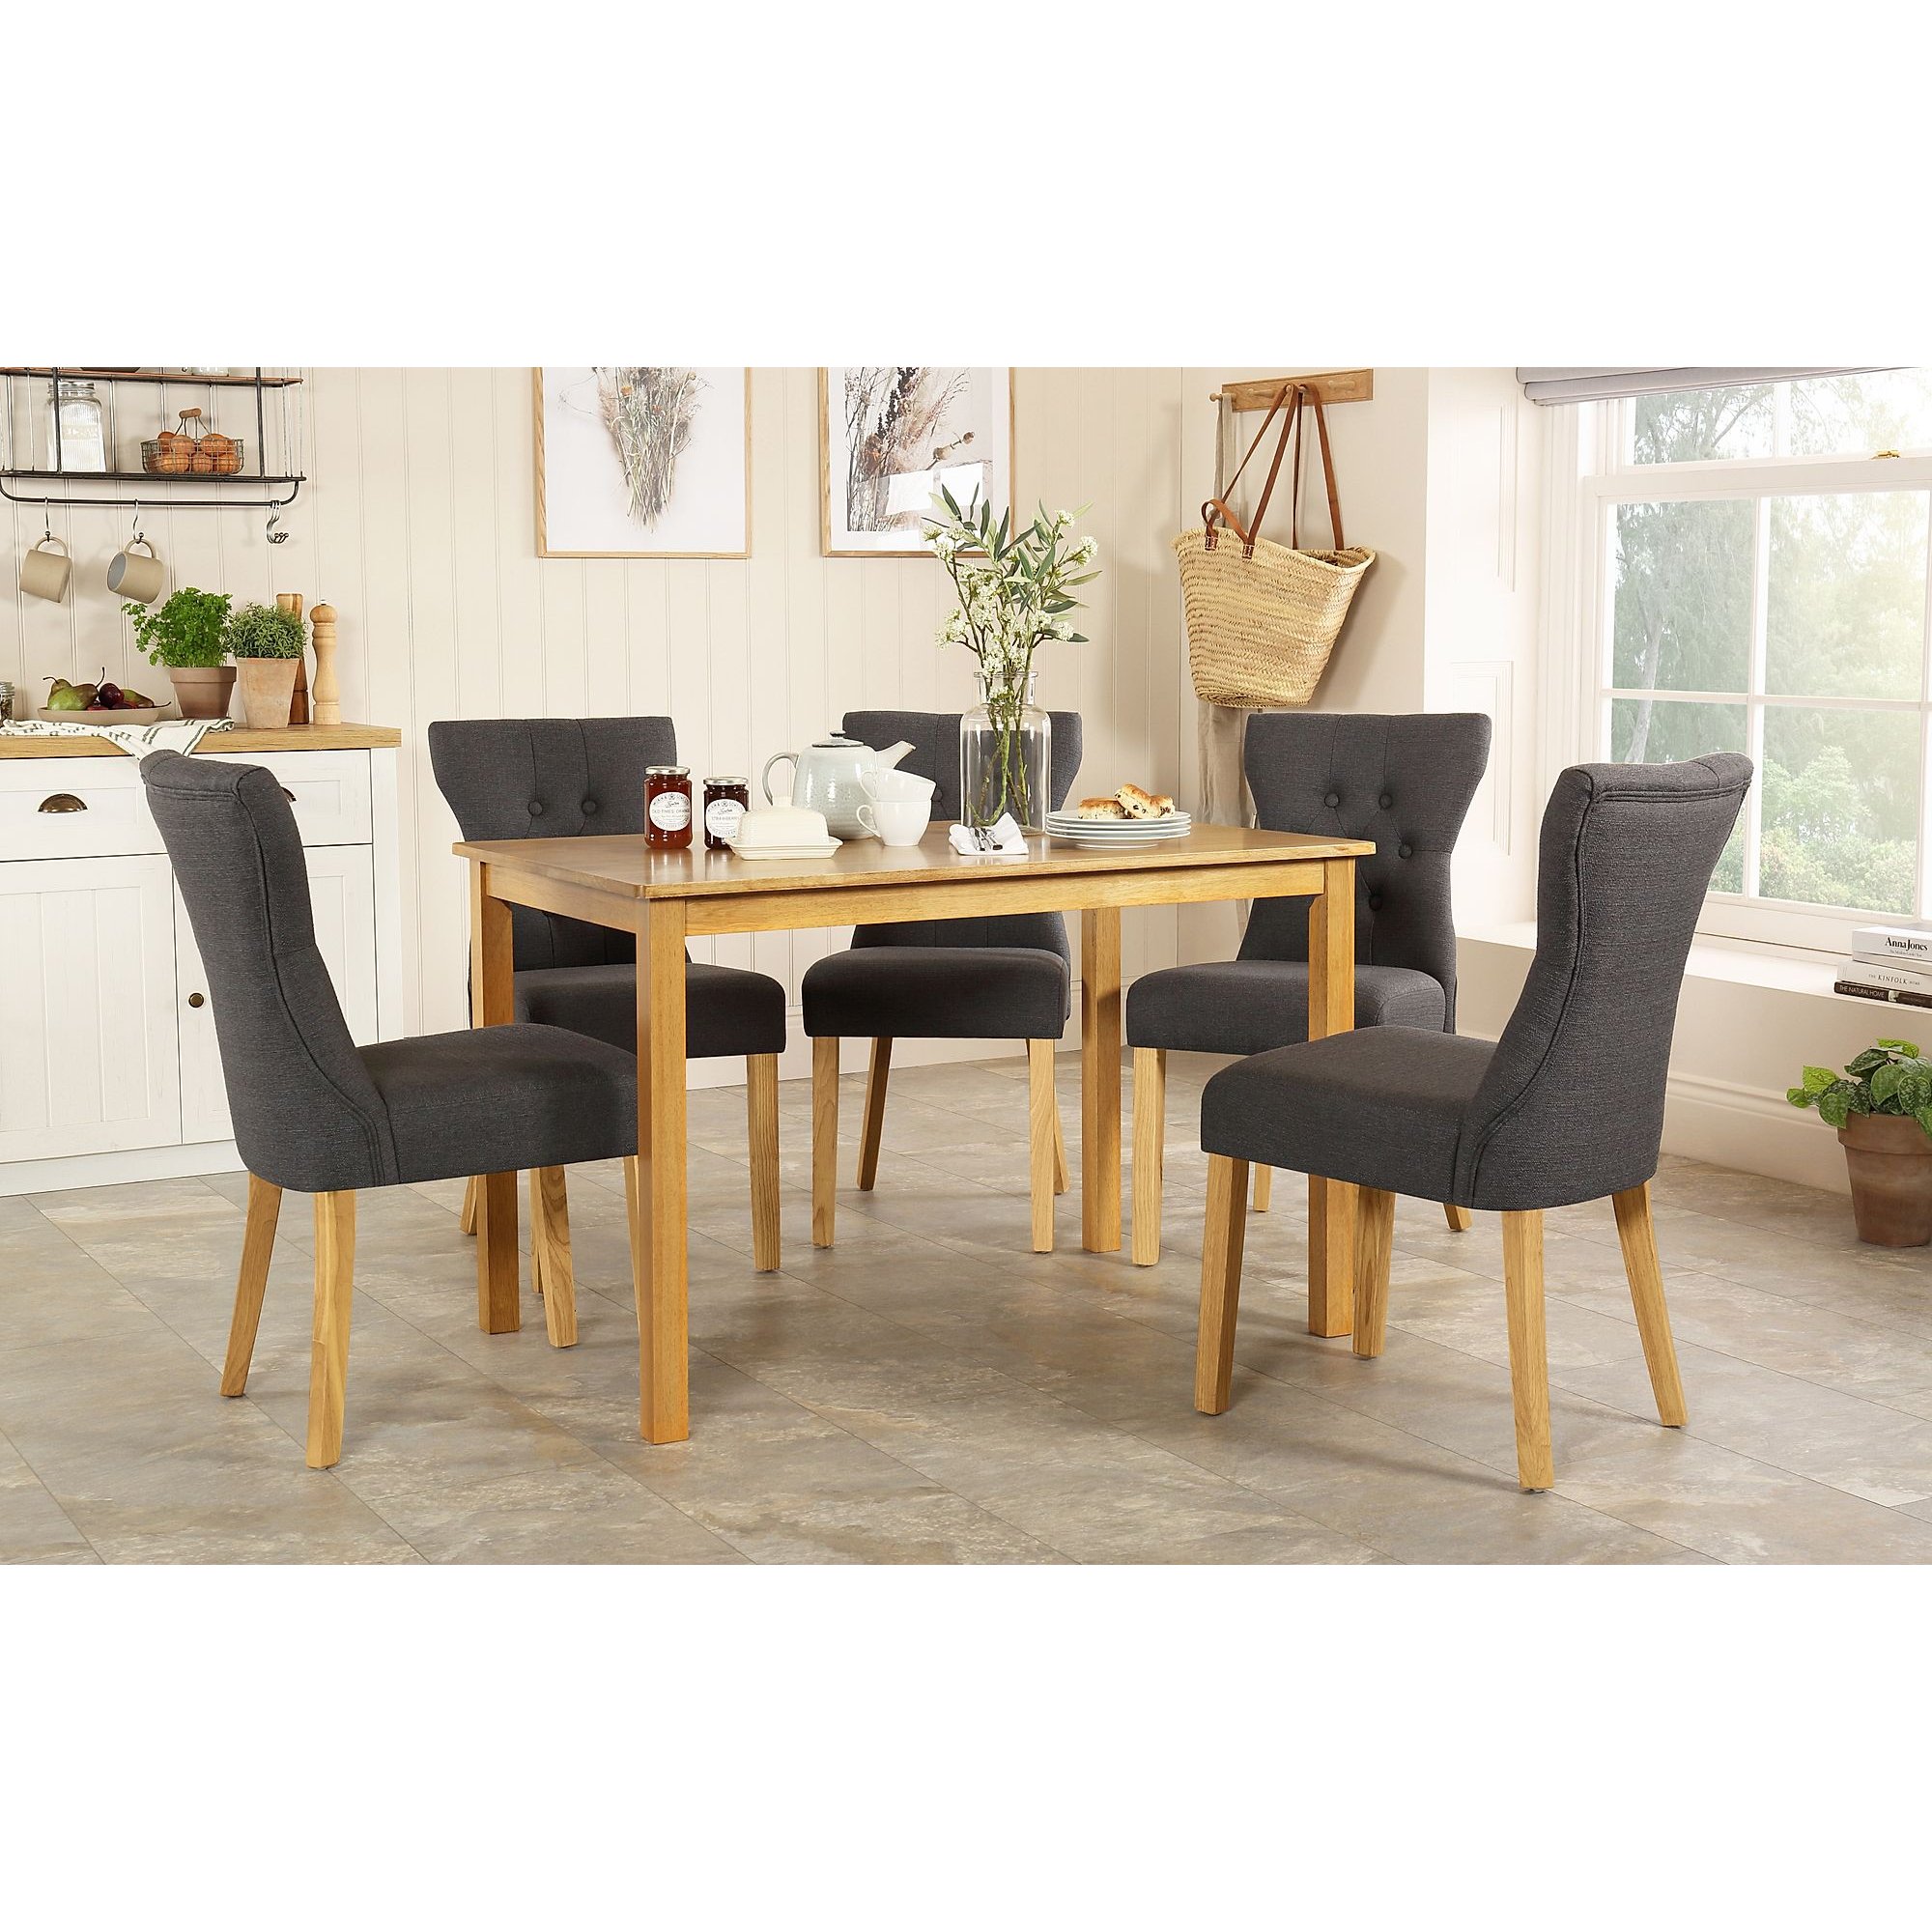 Milton Oak Dining Table with 6 Bewley Slate Fabric Chairs